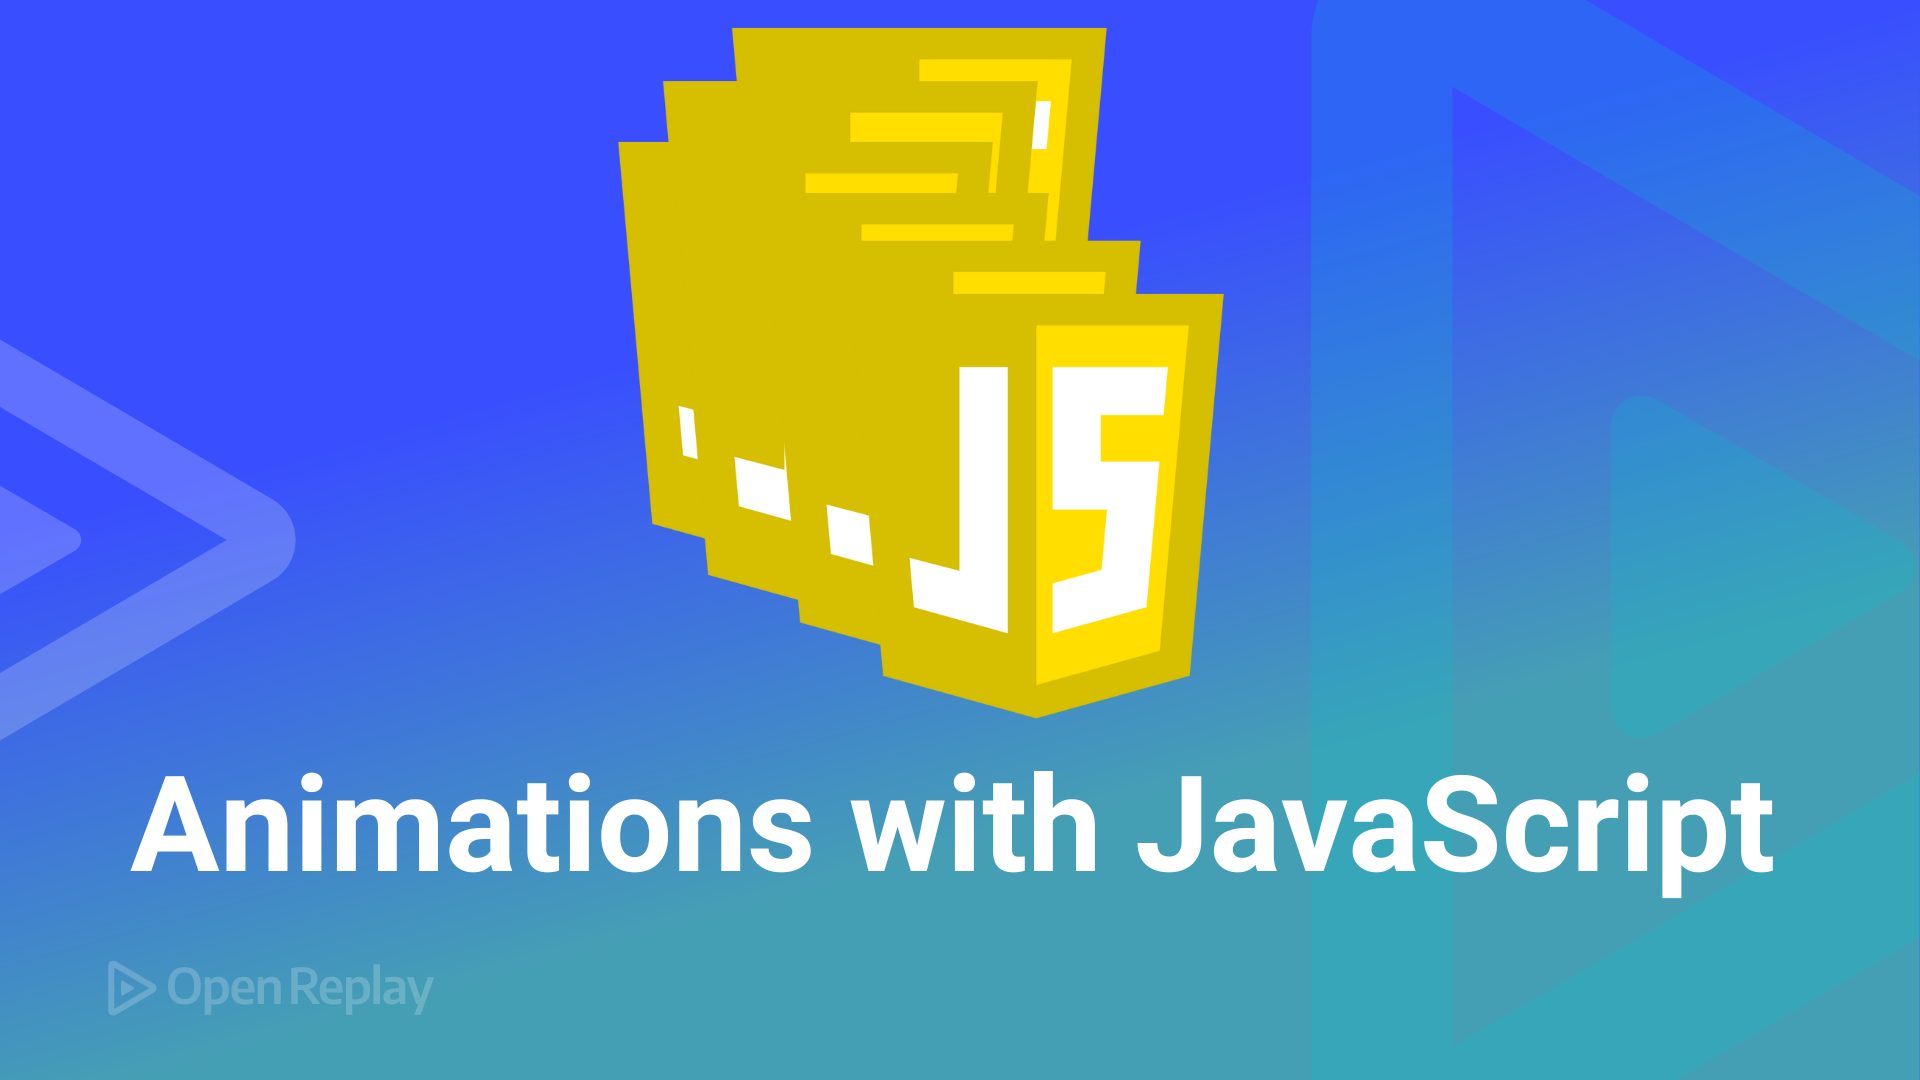 What's the best way to do animations with JavaScript?